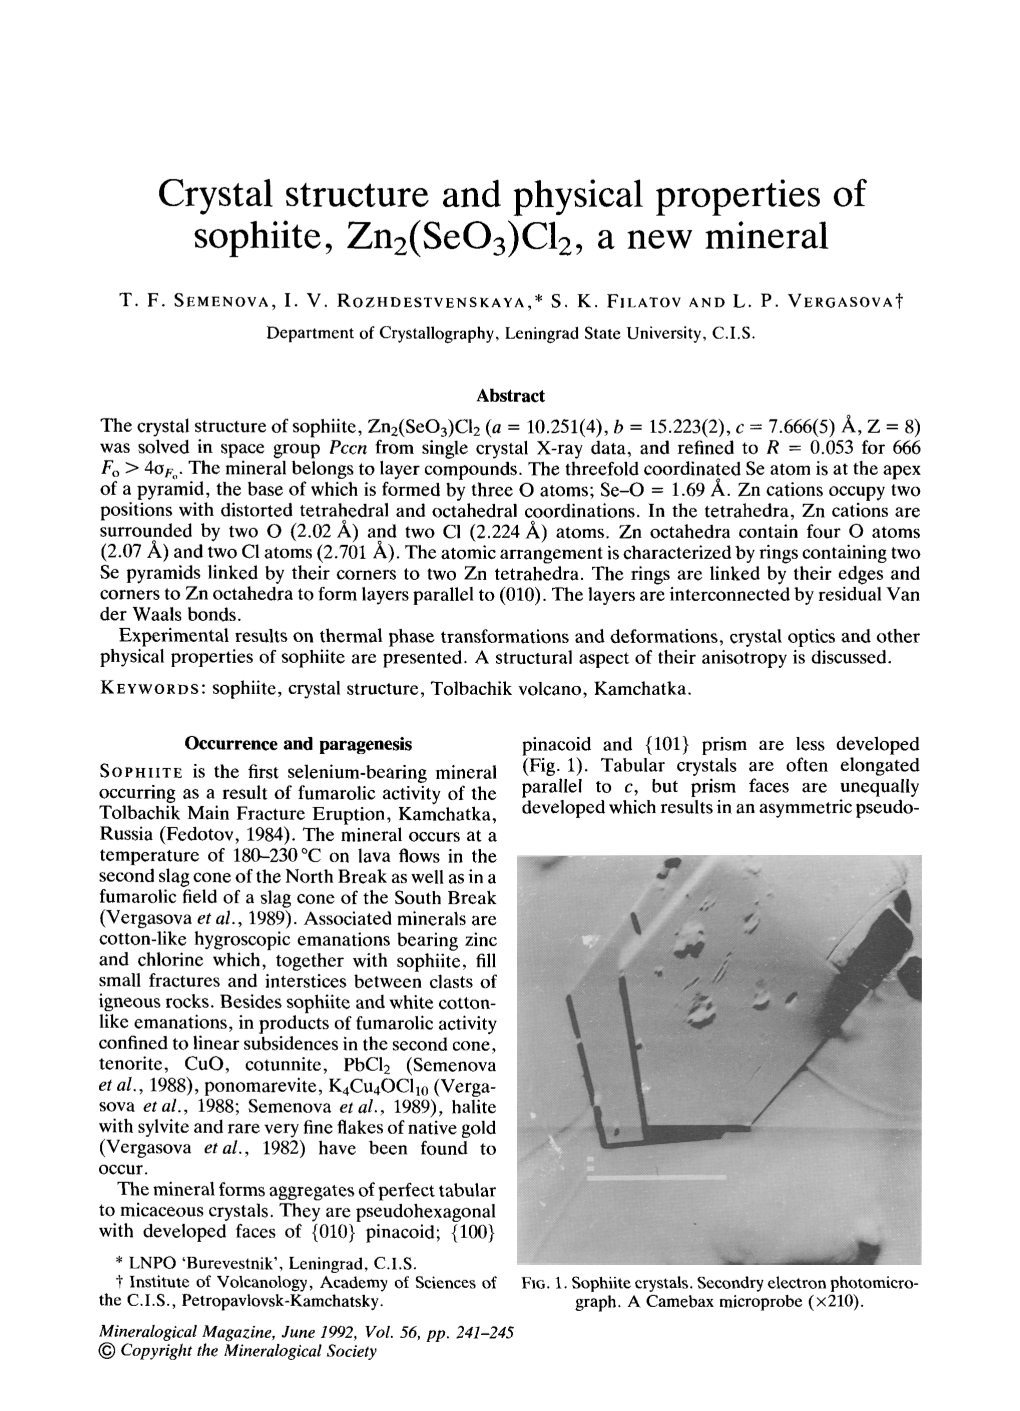 Crystal Structure and Physical Properties of Sophiite, Zn2(Se03)C12, a New Mineral